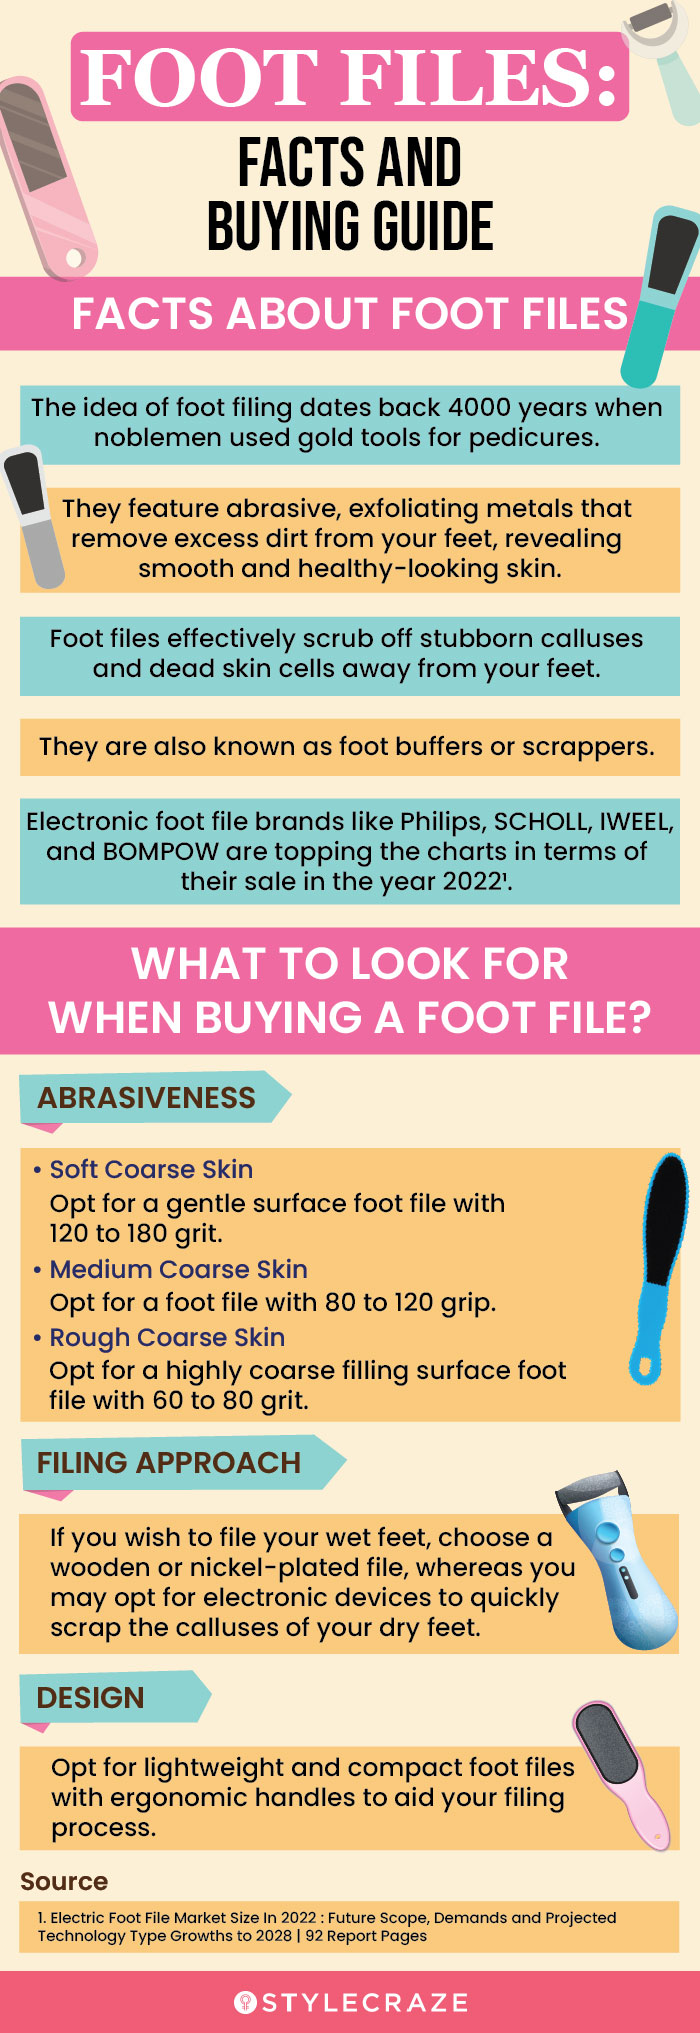 Foot Files: Facts And Buying Guide (infographic)